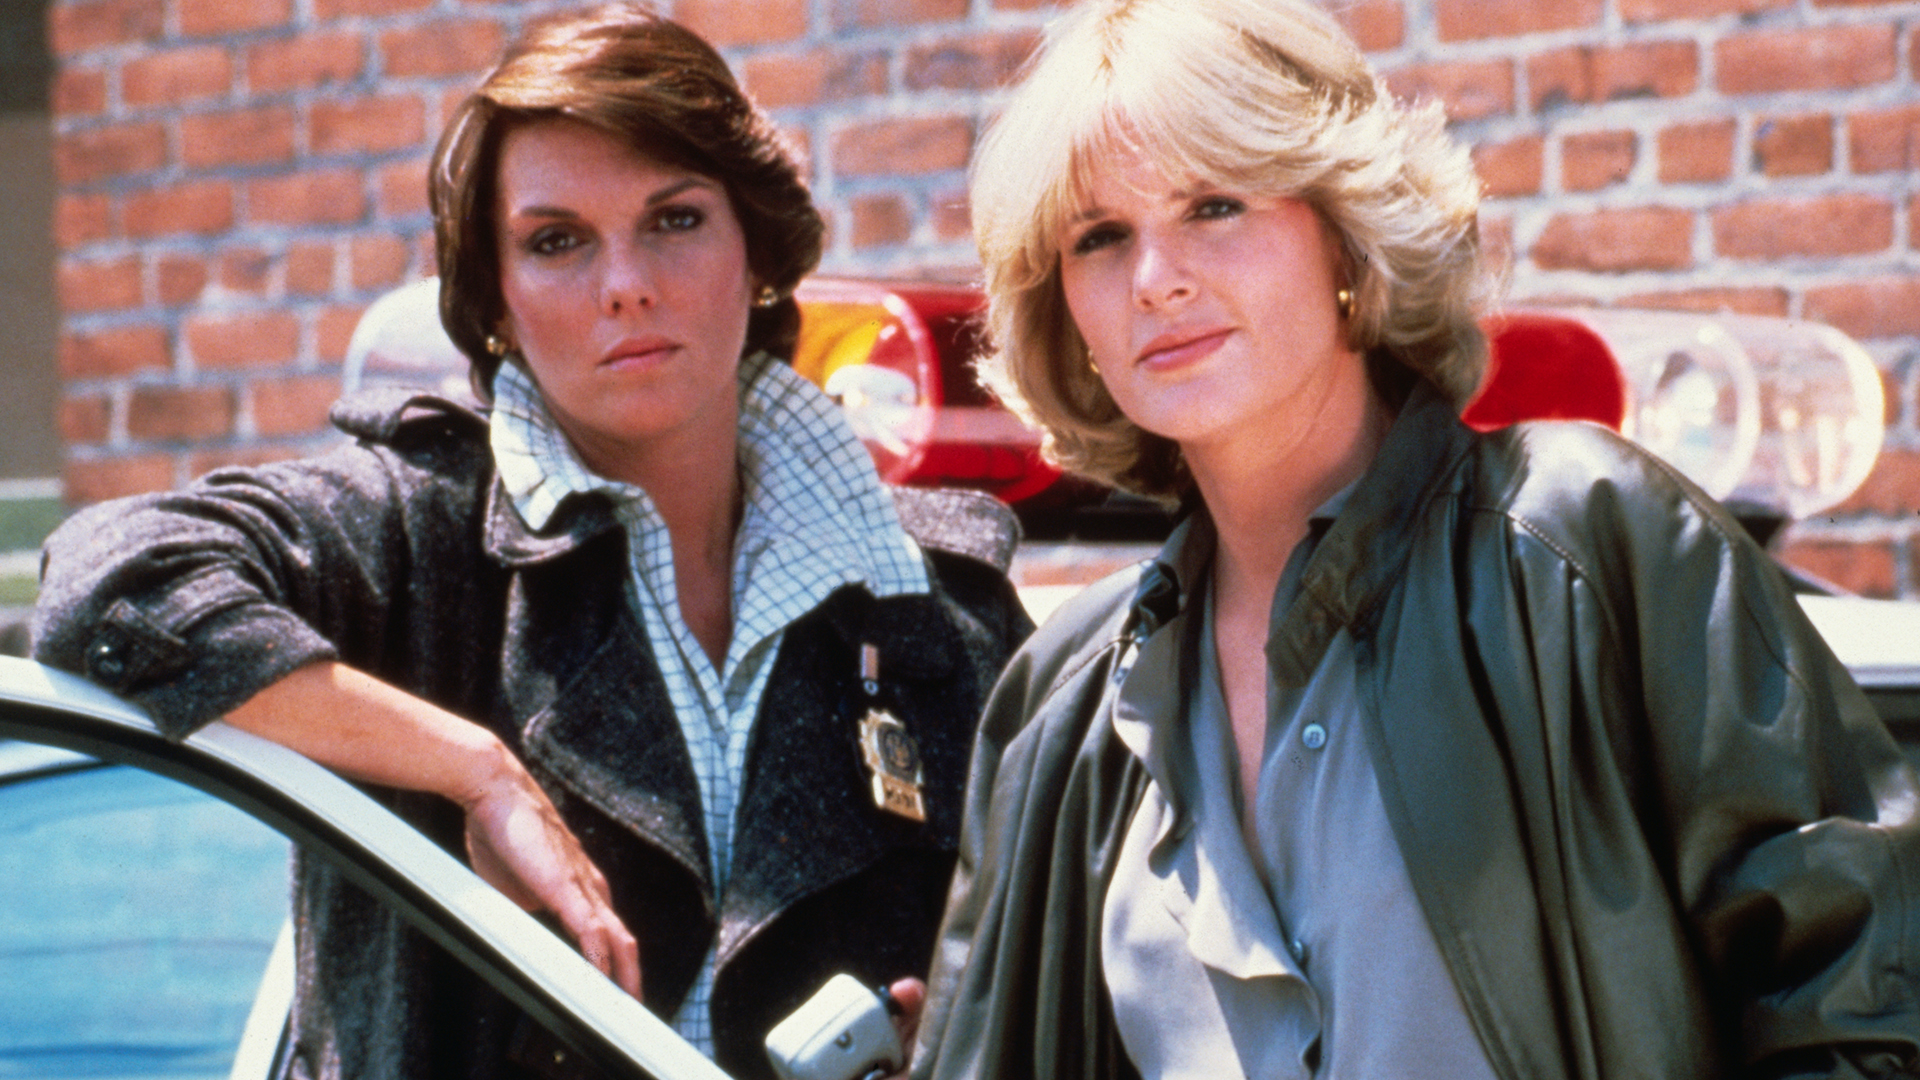 who played the title characters in the tv movie pilot cagney and lacey